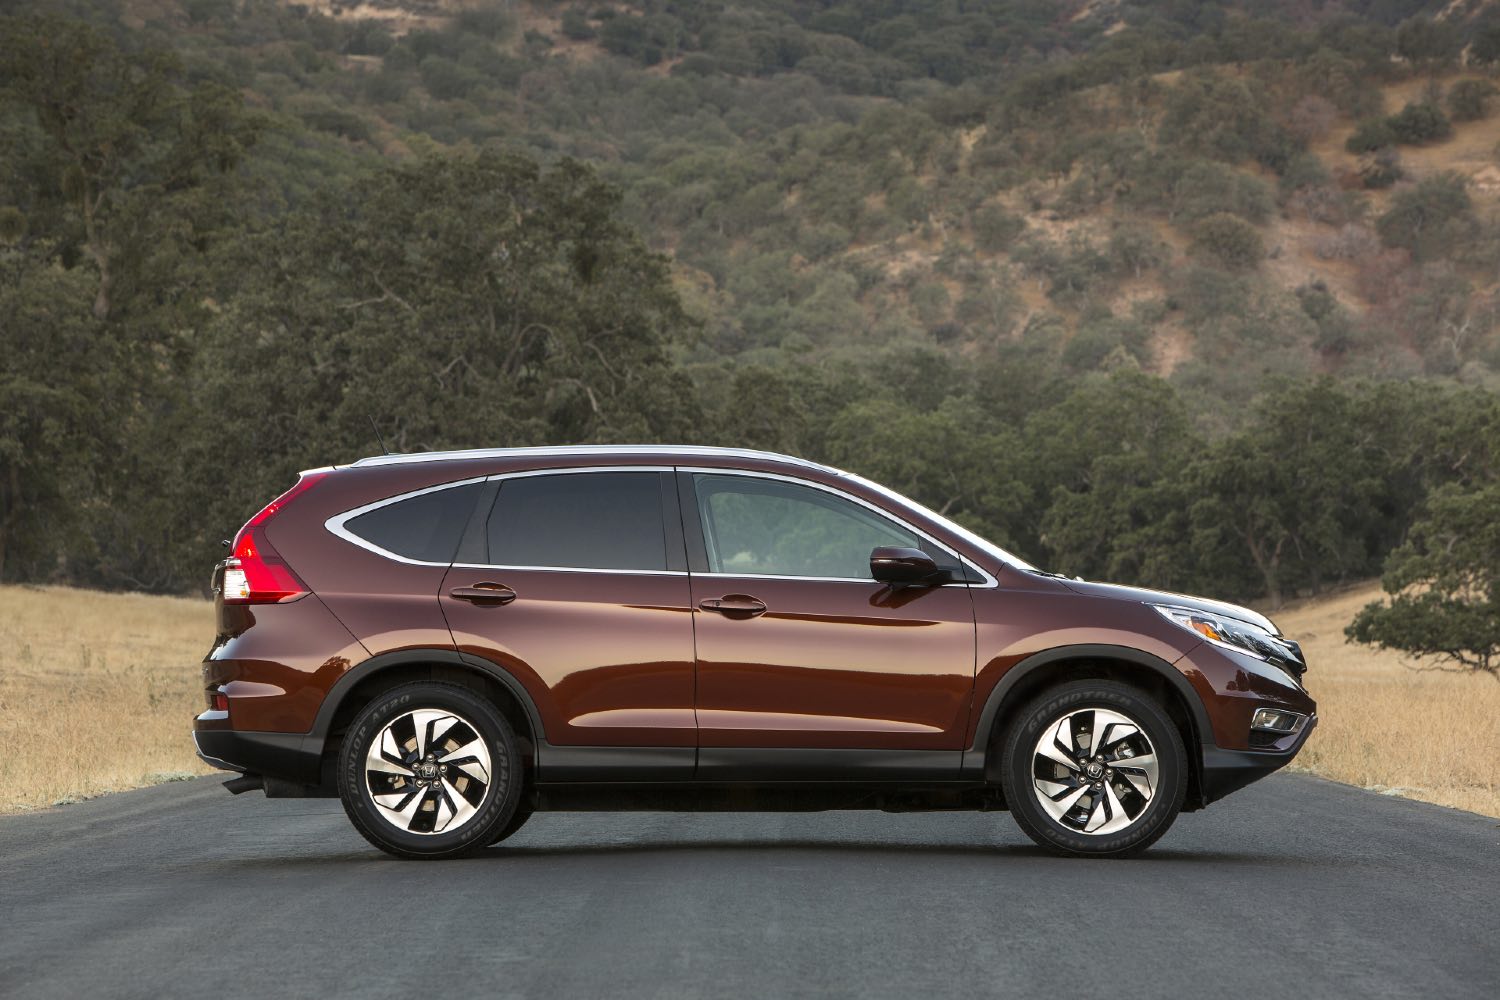 Reliable used compact SUV under $20,000: 2016 Honda CR-V